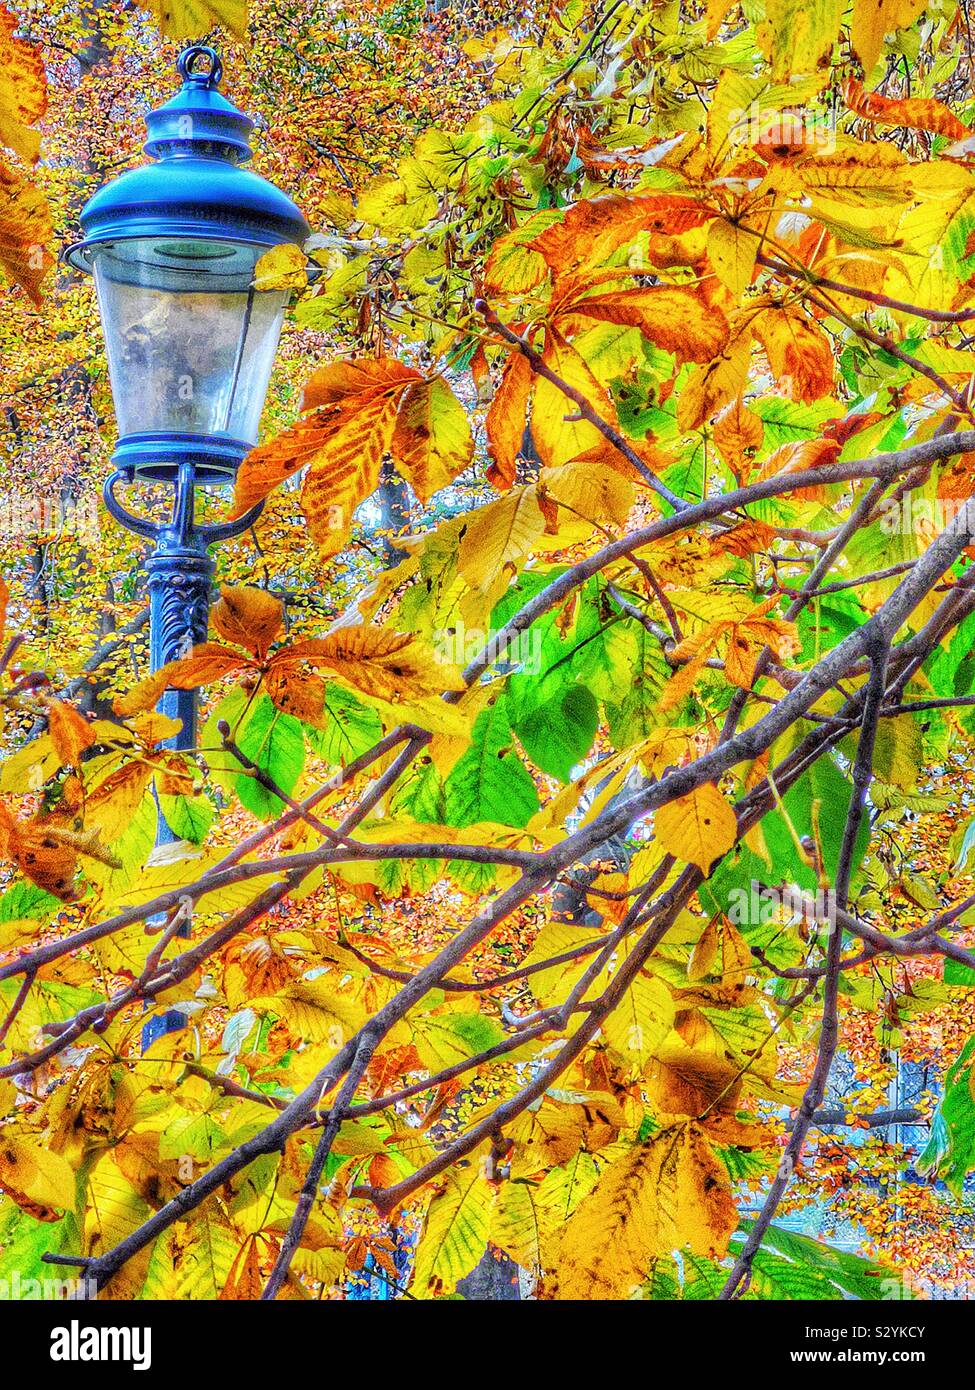 Colourful orange and yellow autumn leaves and old style street lamp, Sweden Stock Photo